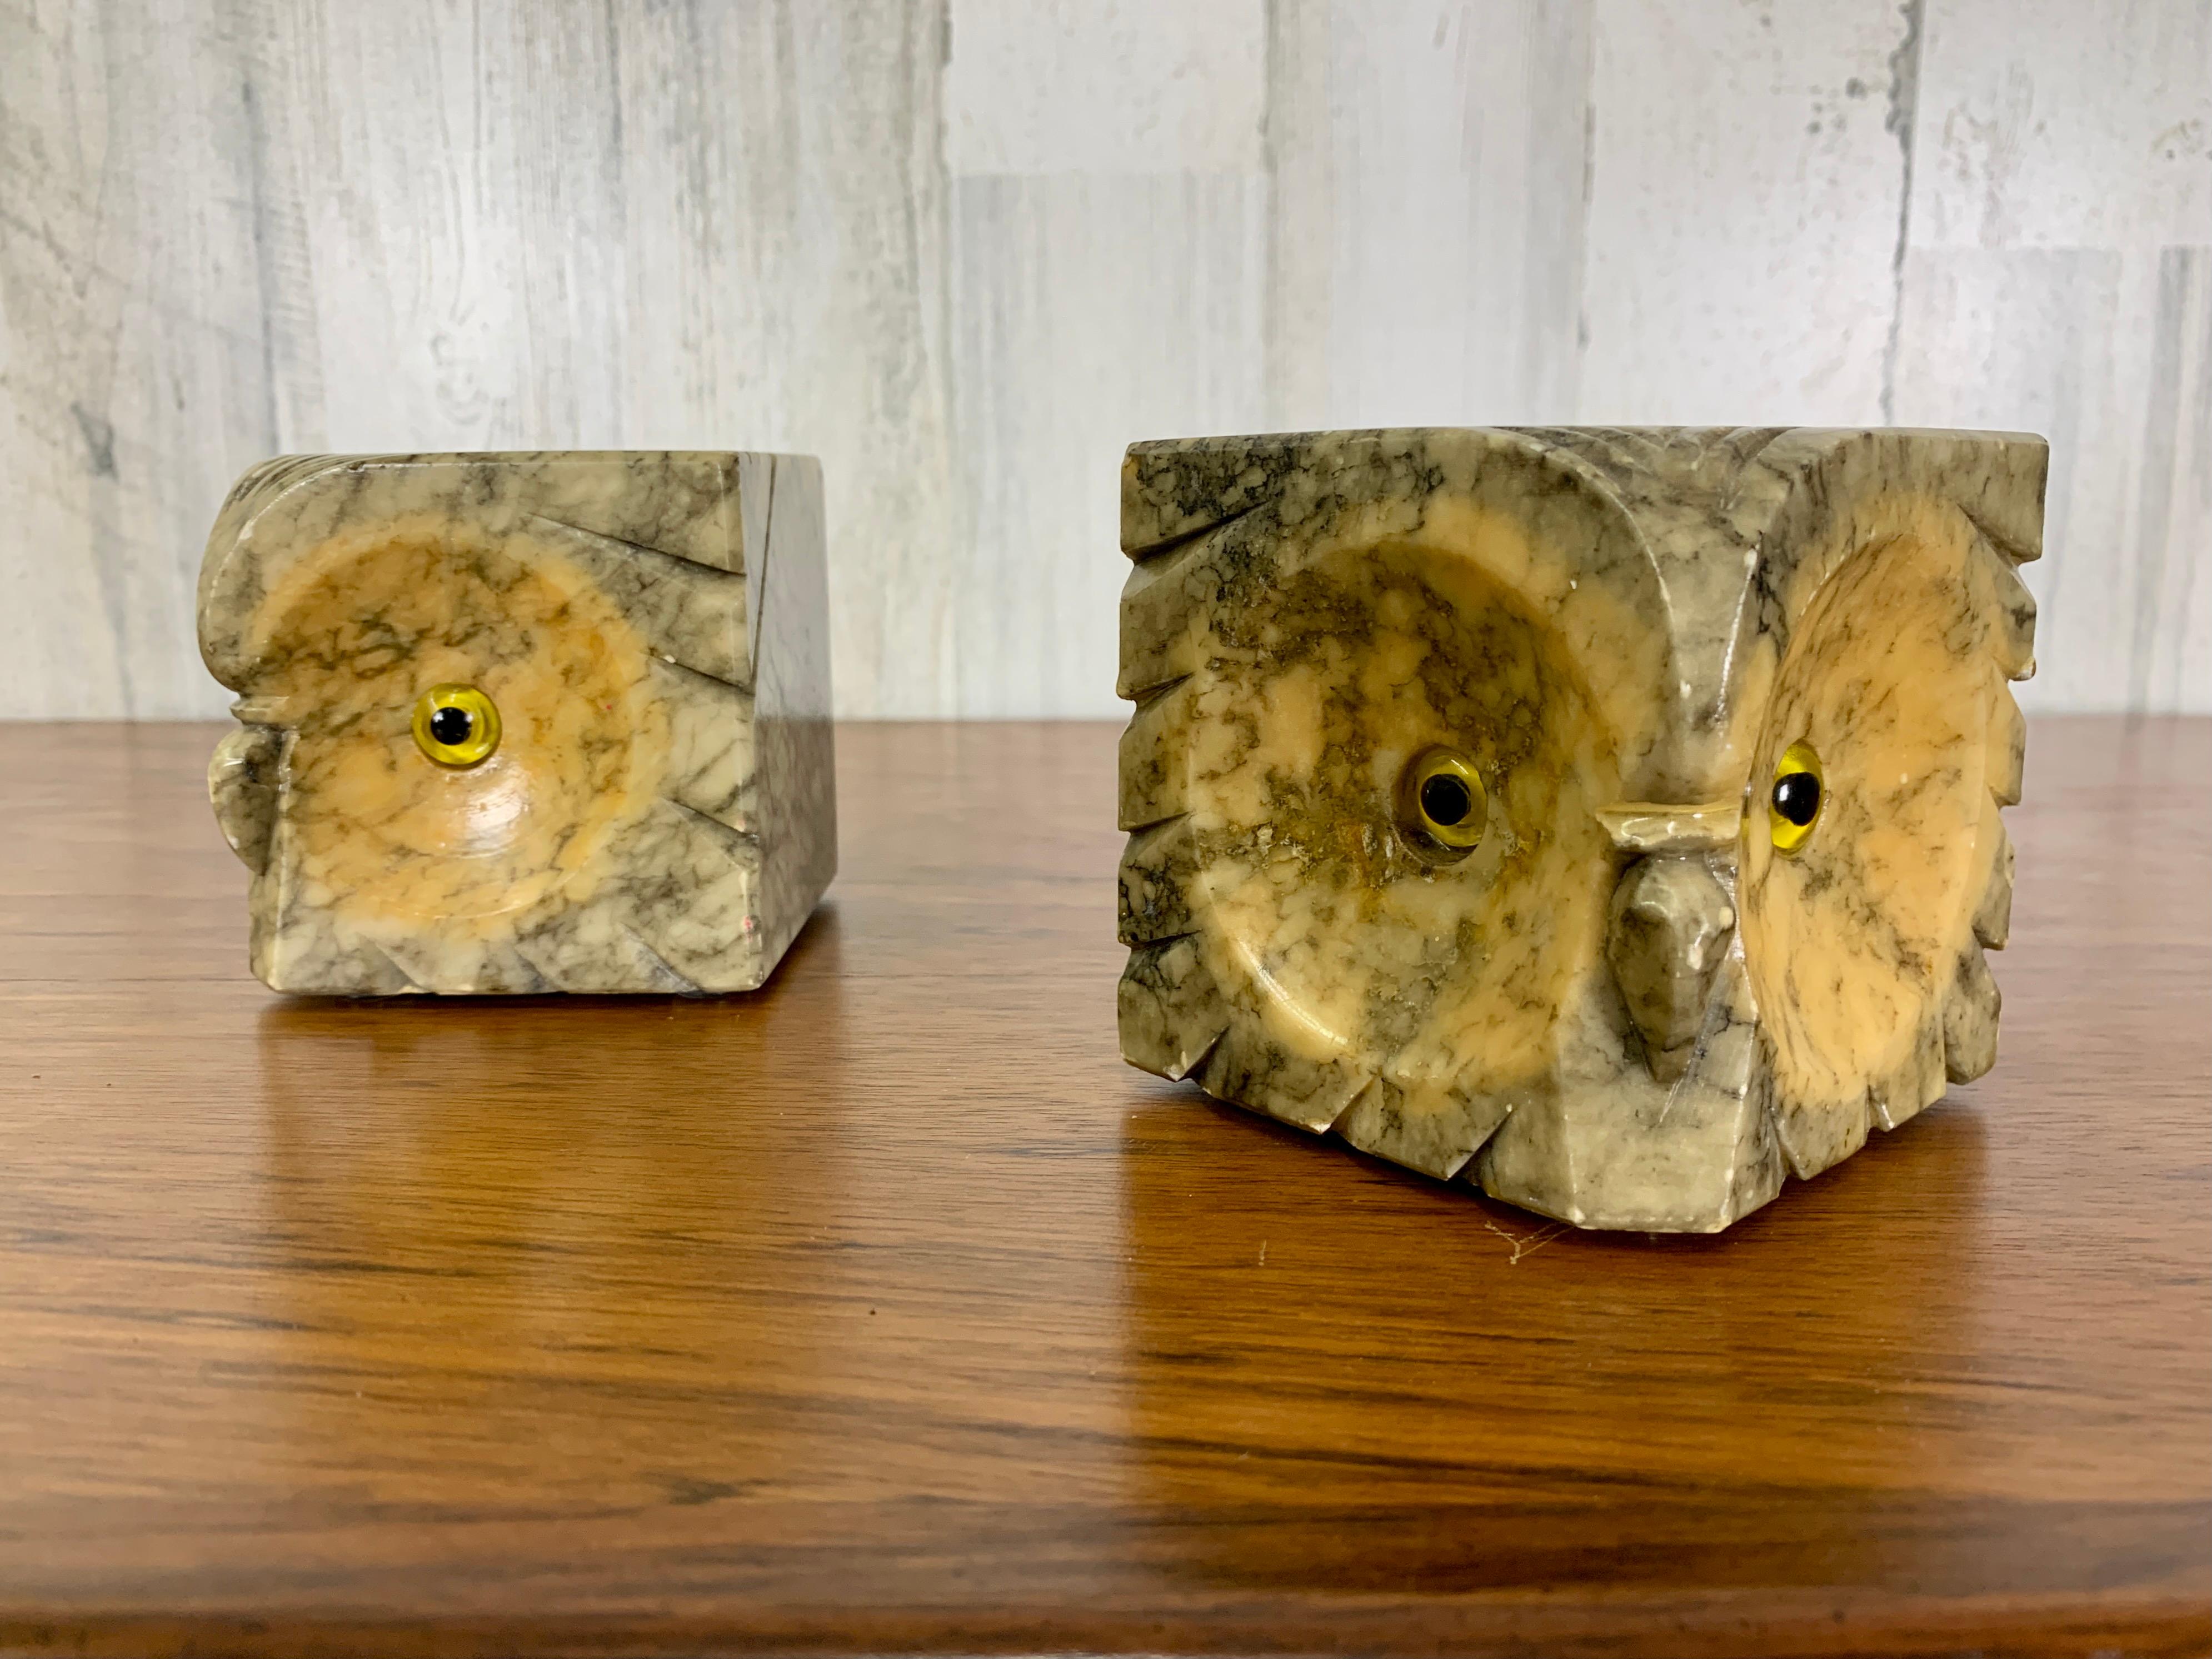 Pair of cubist owl sculptures handcrafted in Italy with glass eyes.